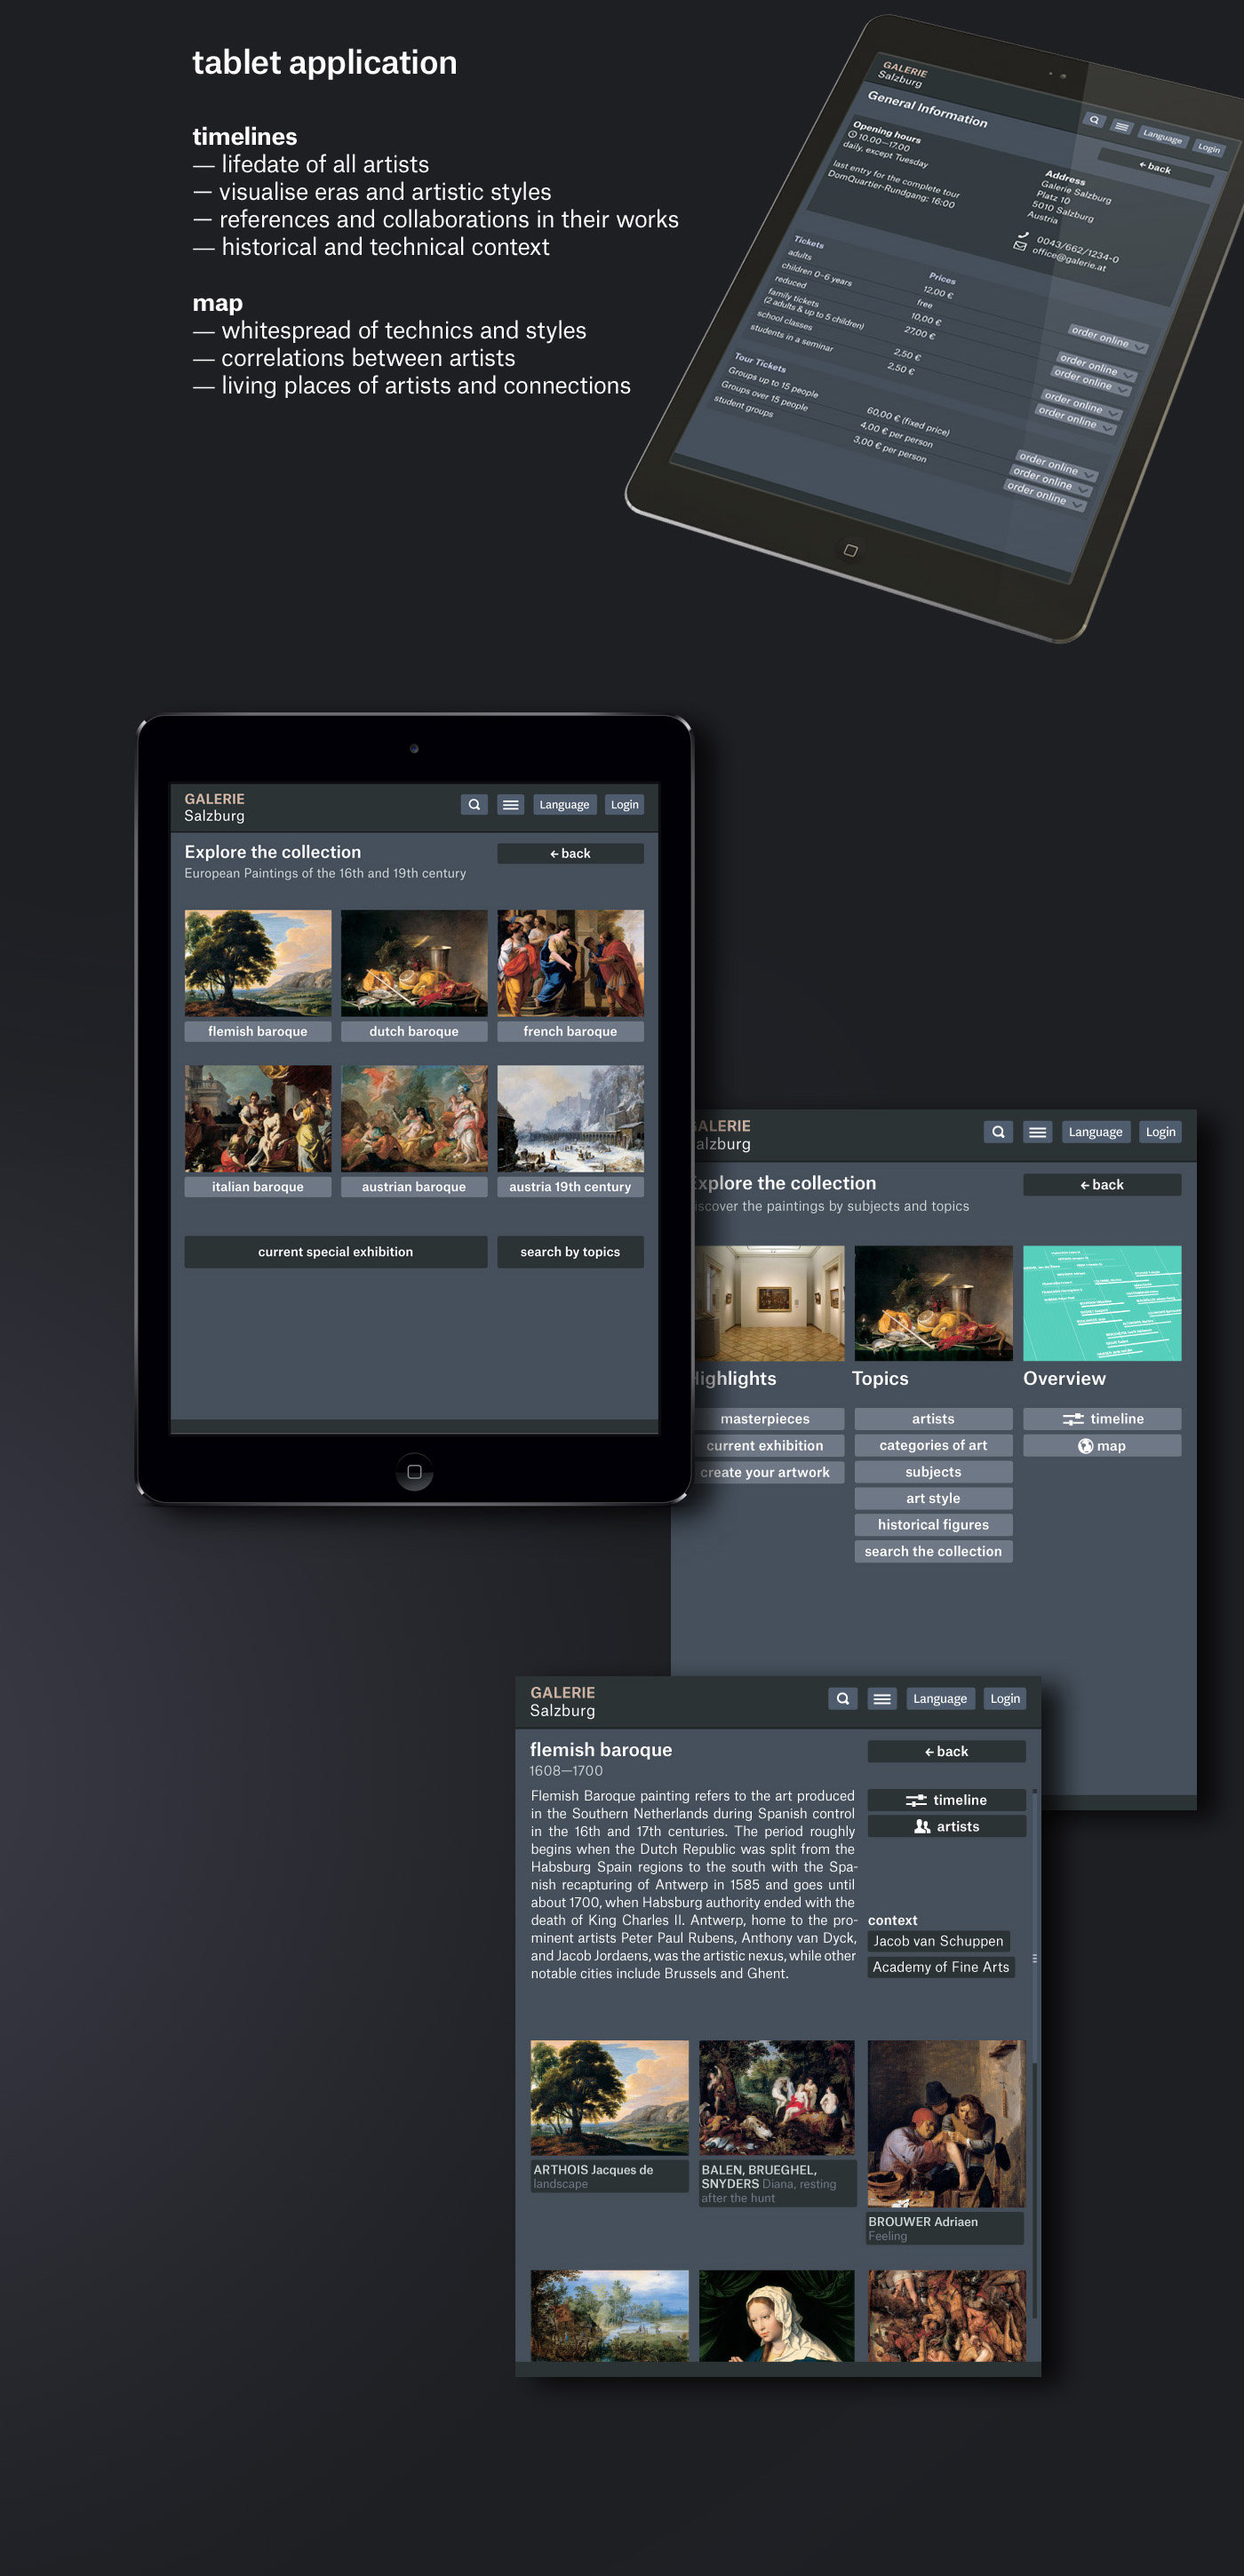 gallery app museum timeline Screen Design art history artists rfid recognition